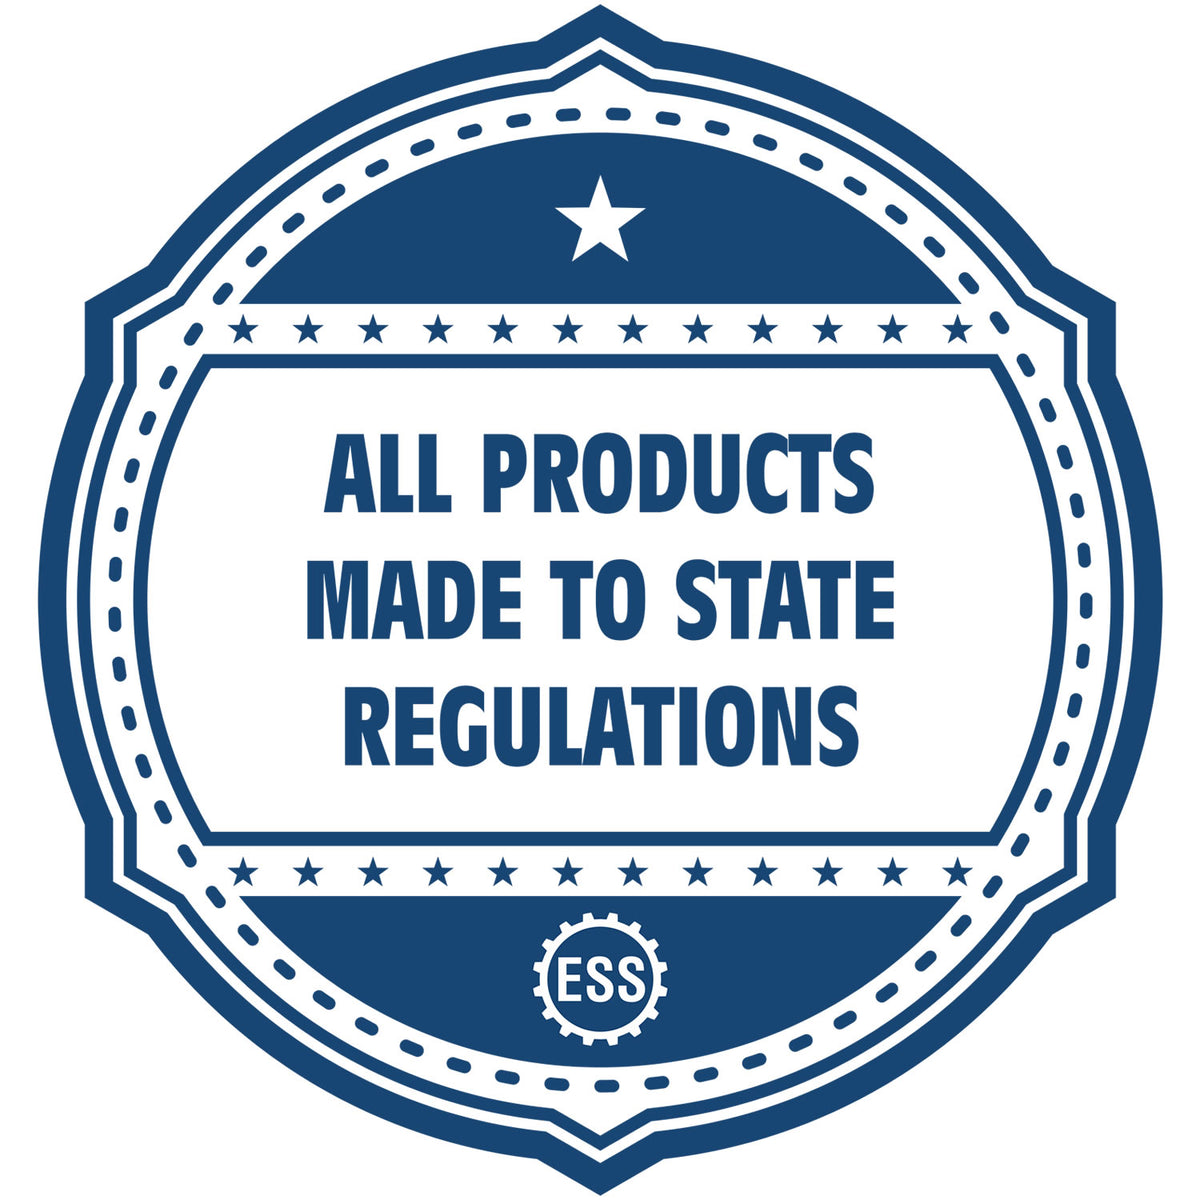 An icon or badge element for the Slim Pre-Inked State Seal Notary Stamp for Wisconsin showing that this product is made in compliance with state regulations.